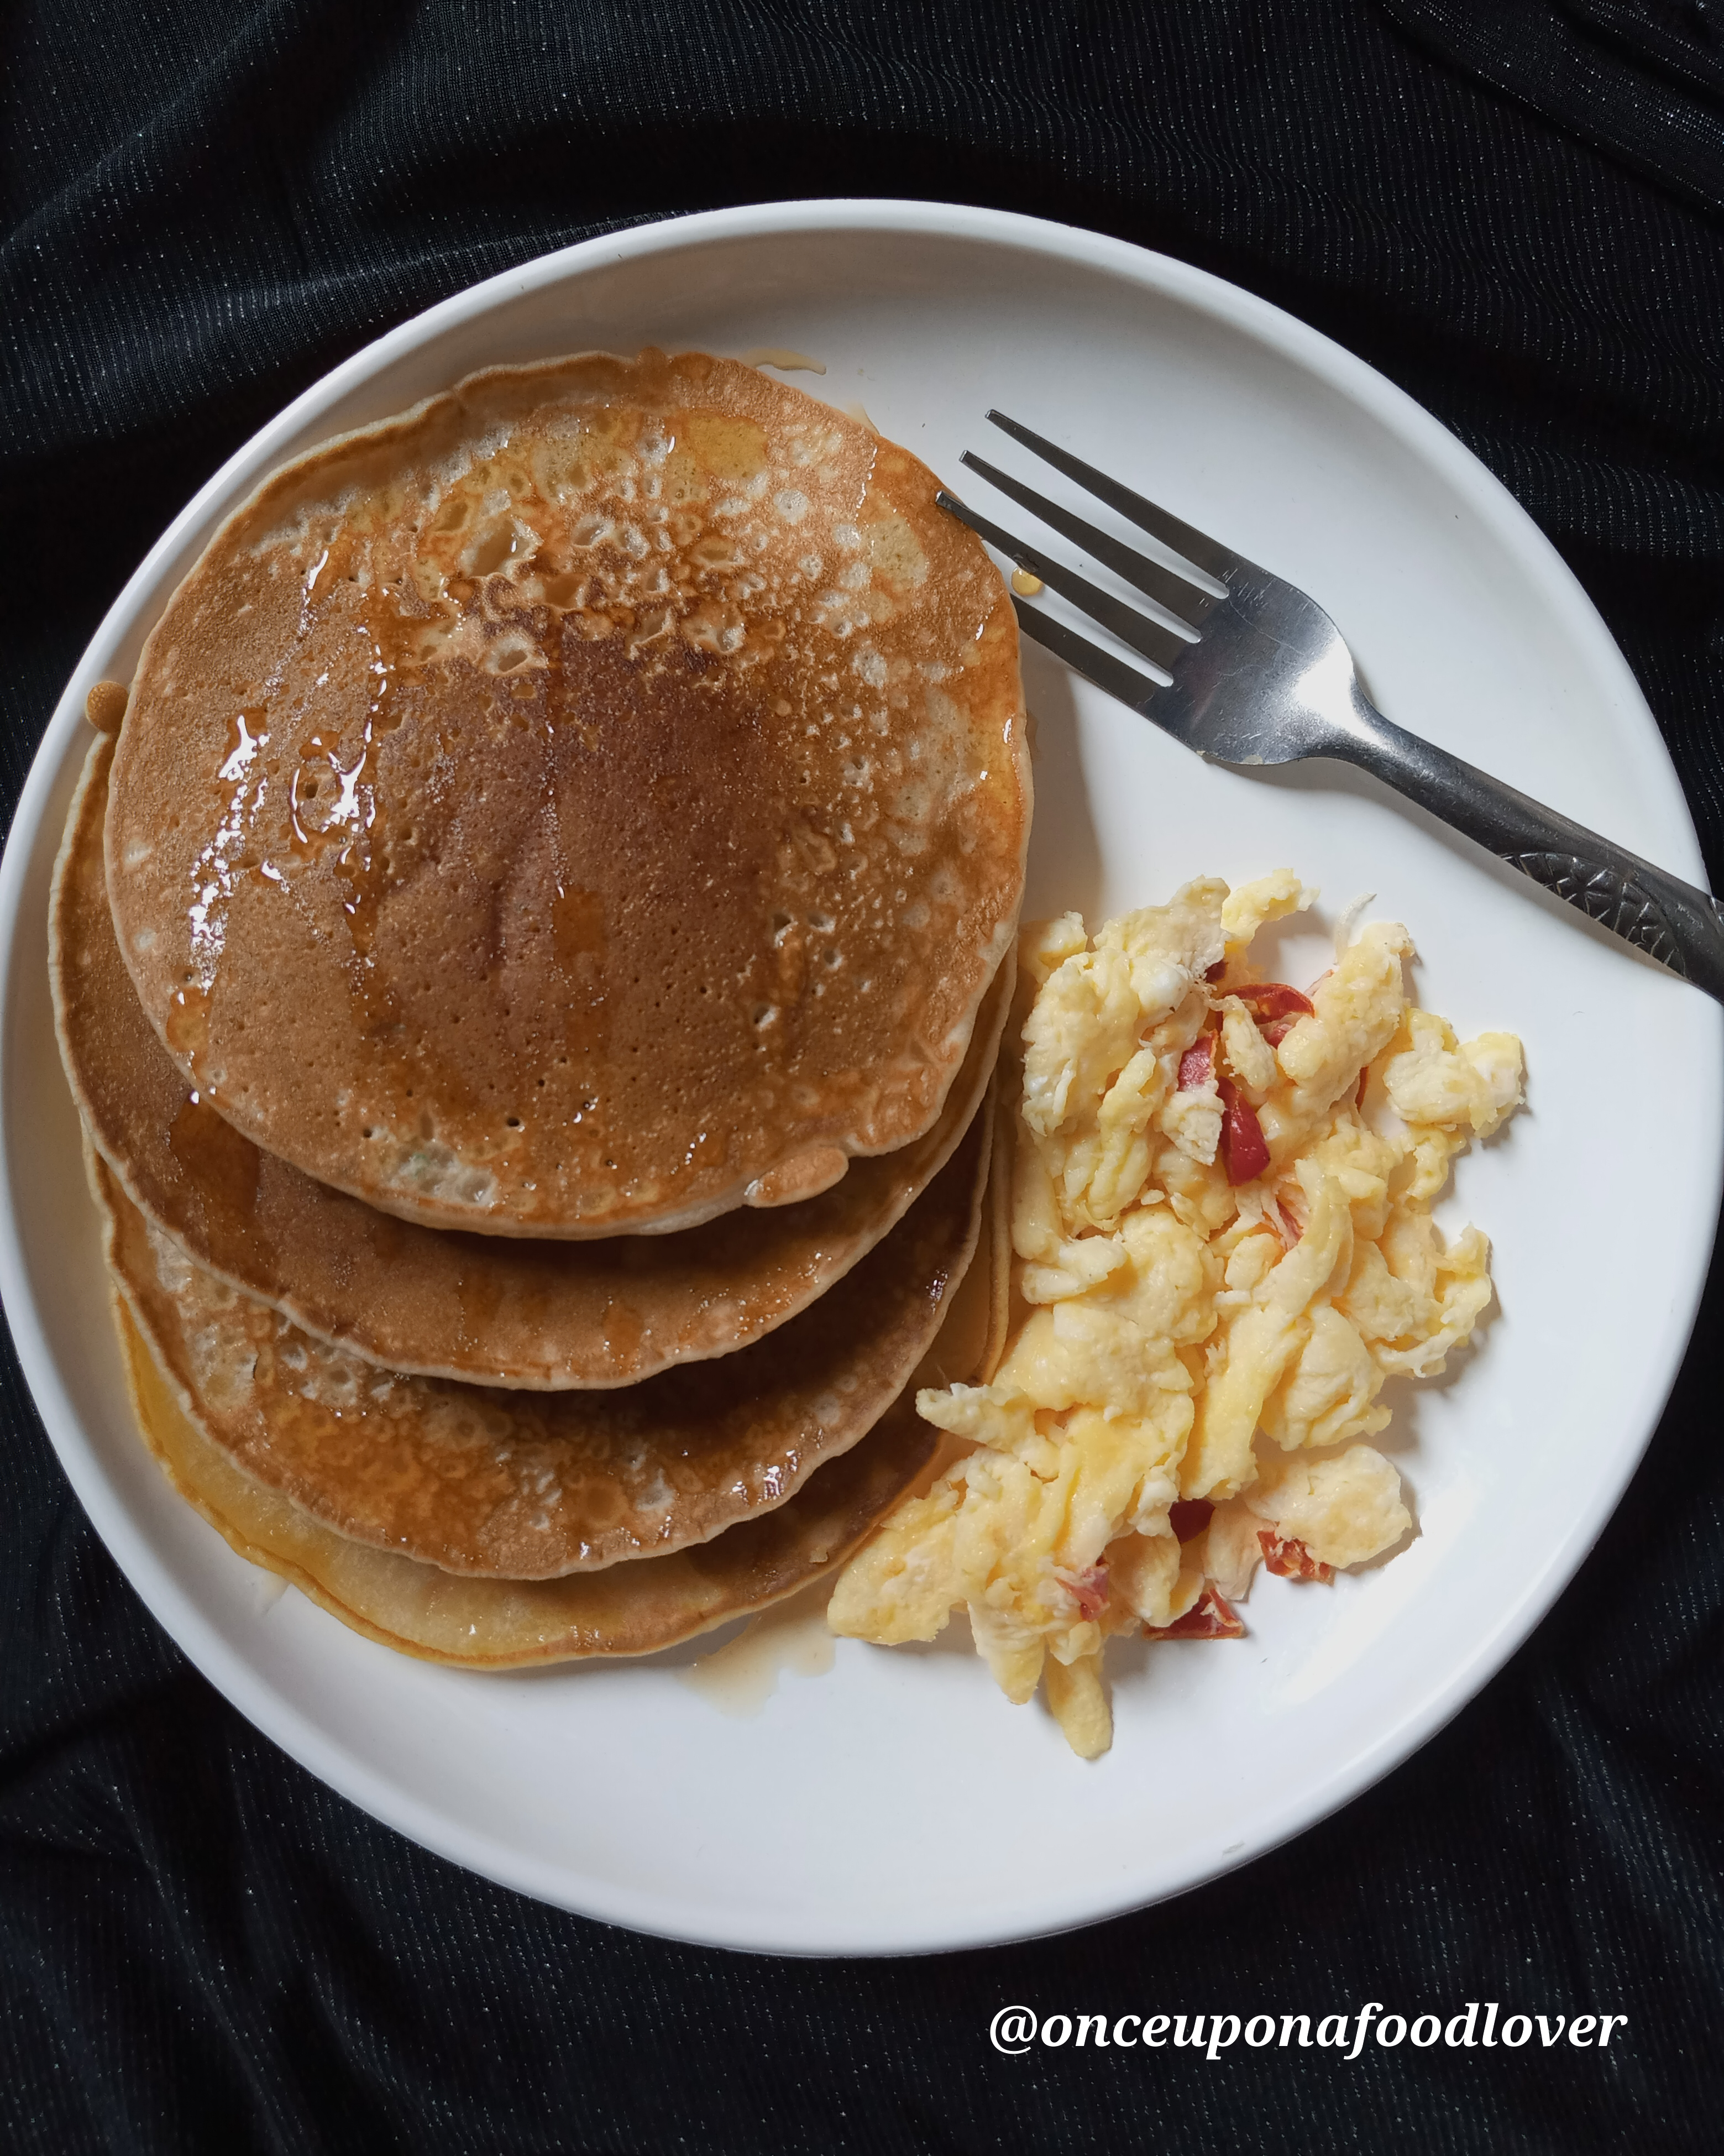 Pancakes and Scrambled Eggs